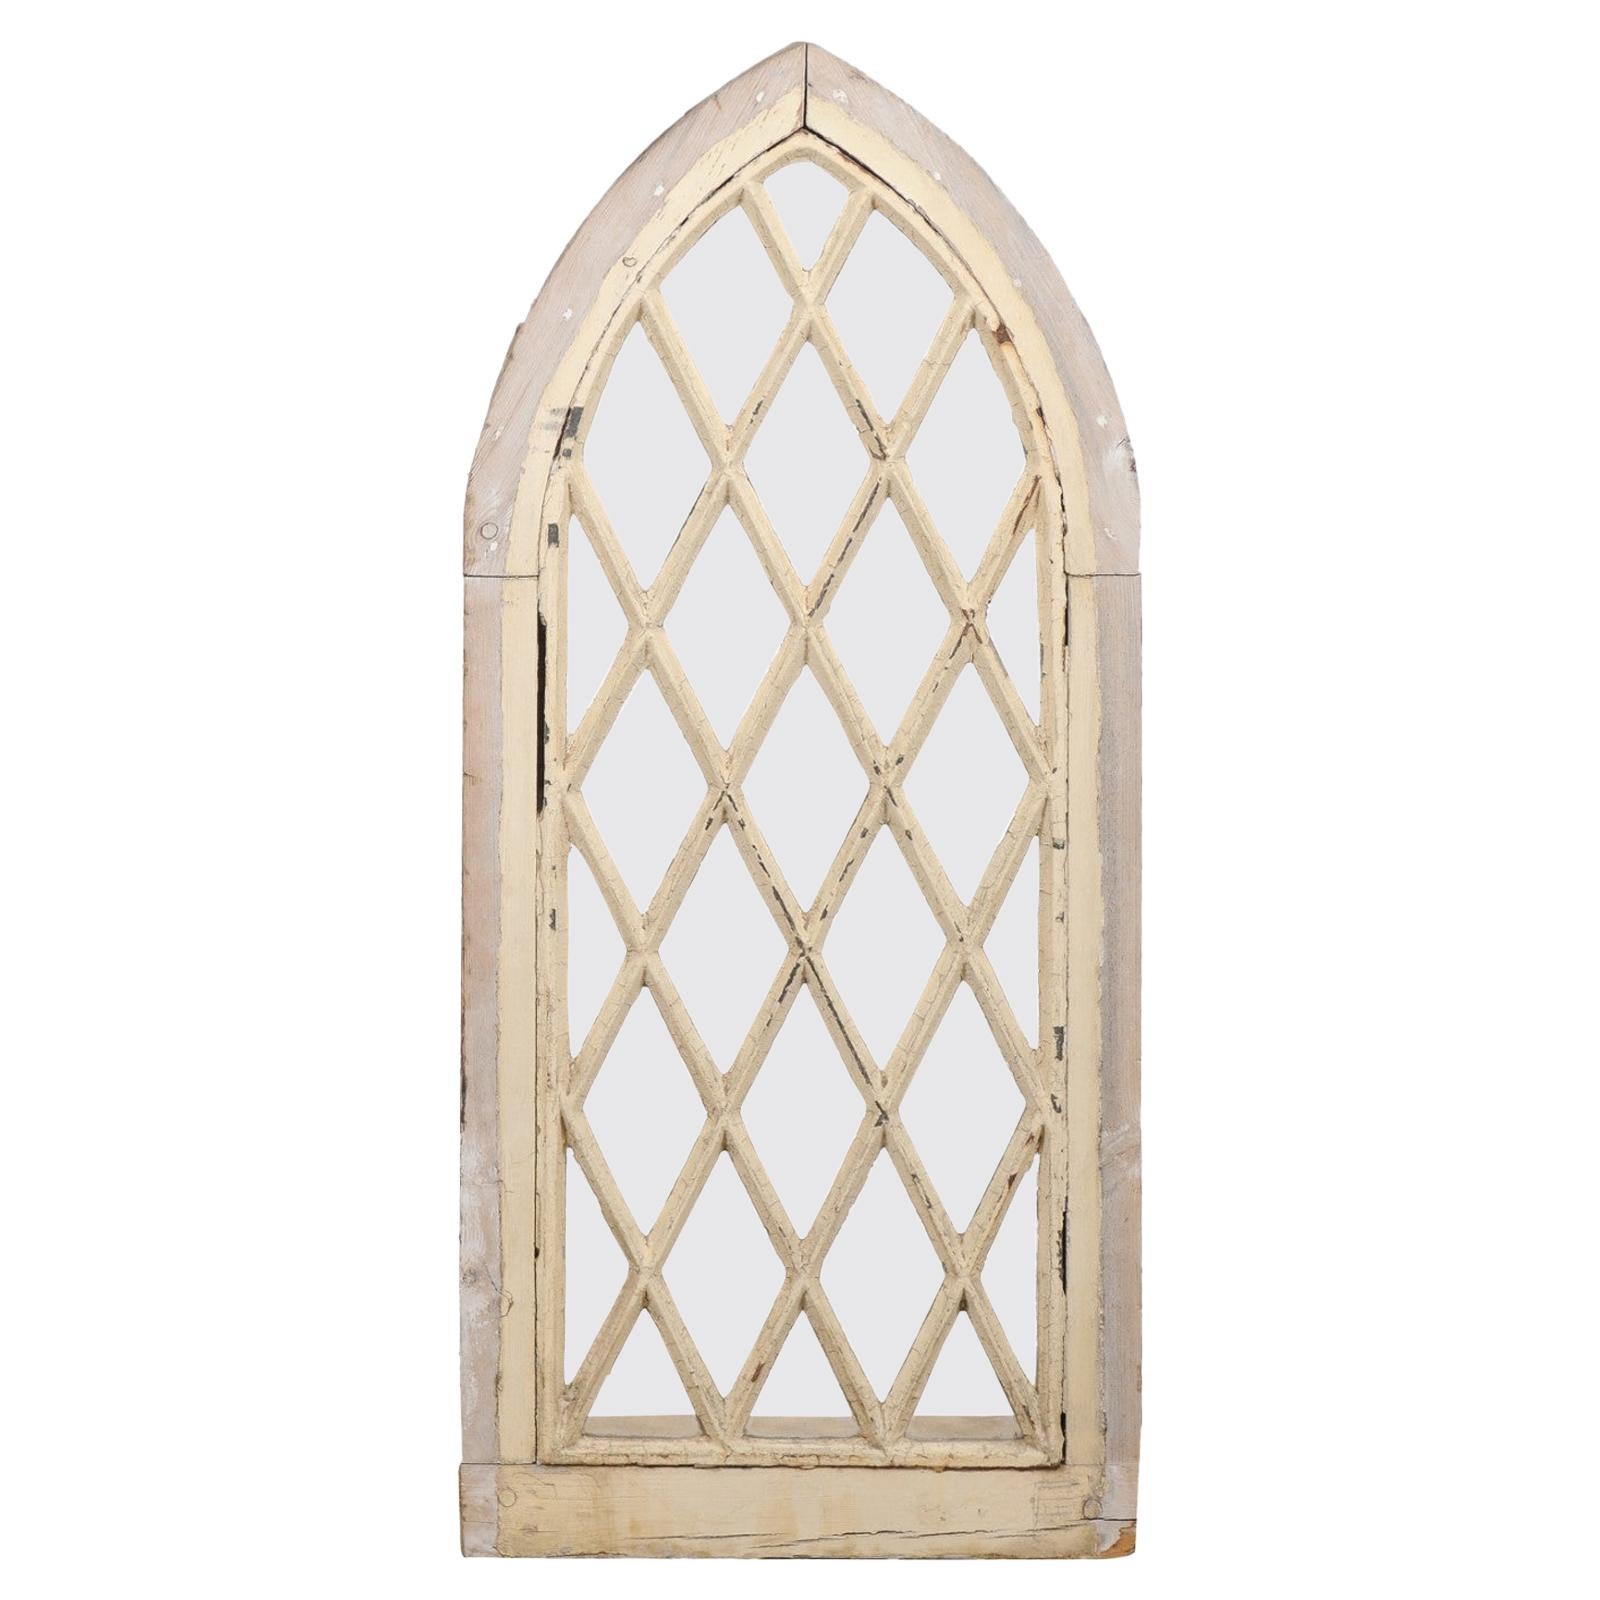 English 19th Century Gothic Revival Broken Arch Church Window with Mullions